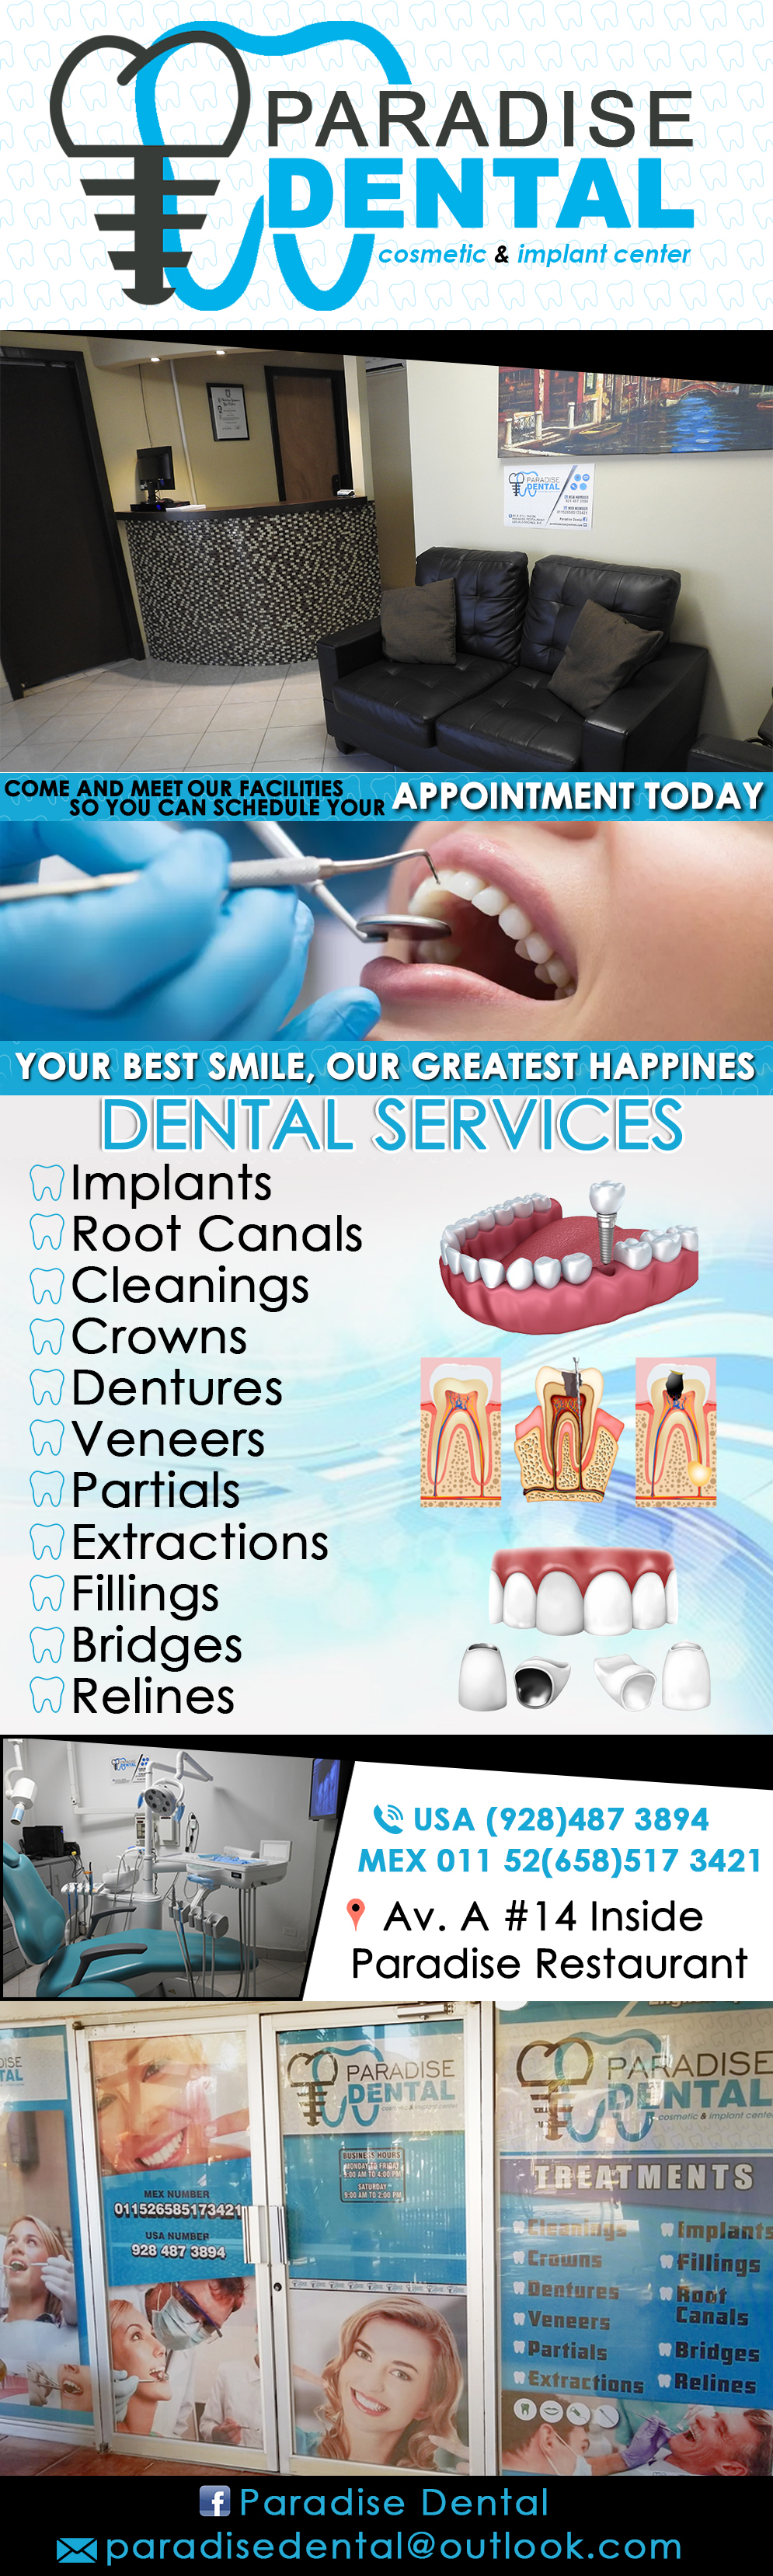 Paradise Dental Cosmetic & Implant Center-ENGLISH SPOKEN
Treatmentes: Cleanings, Crowns, Veneers, Partials, Extractions, Fillings, Bridges, Implants, Root Canal,Relines.    